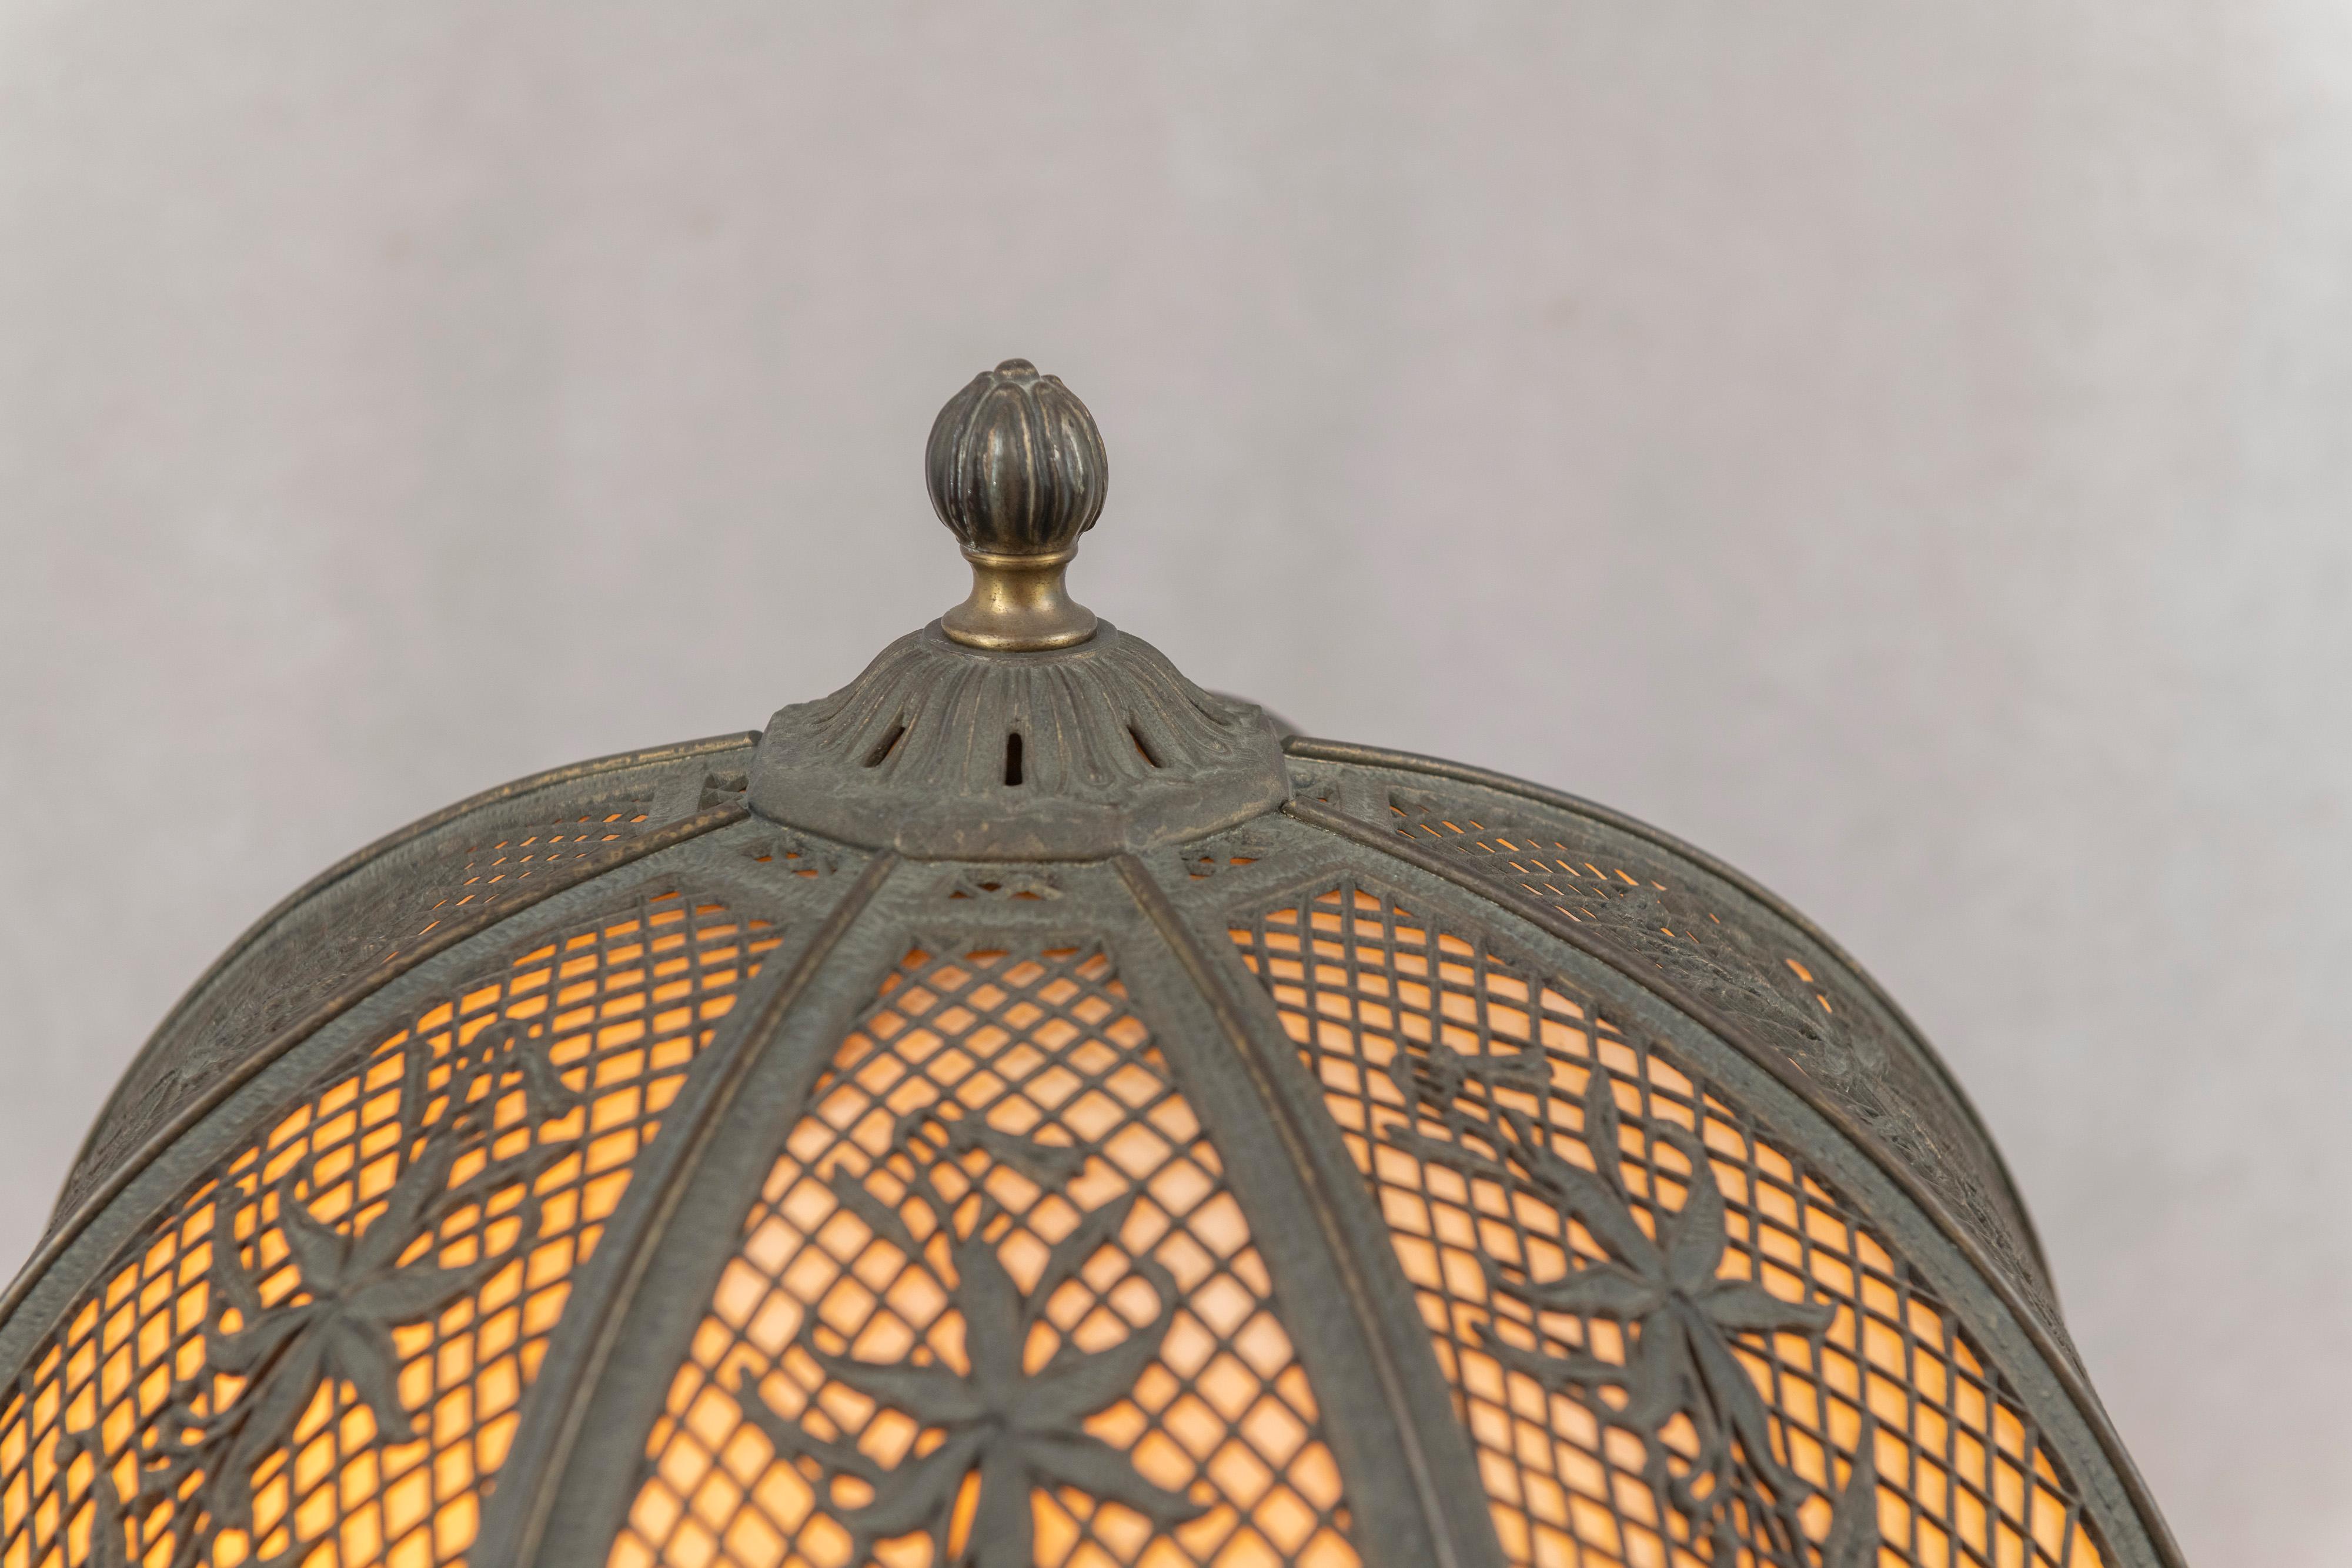 An American Panel Lamp w/ Metal Overlay, Signed B & H, ca. 1915 In Good Condition For Sale In Petaluma, CA